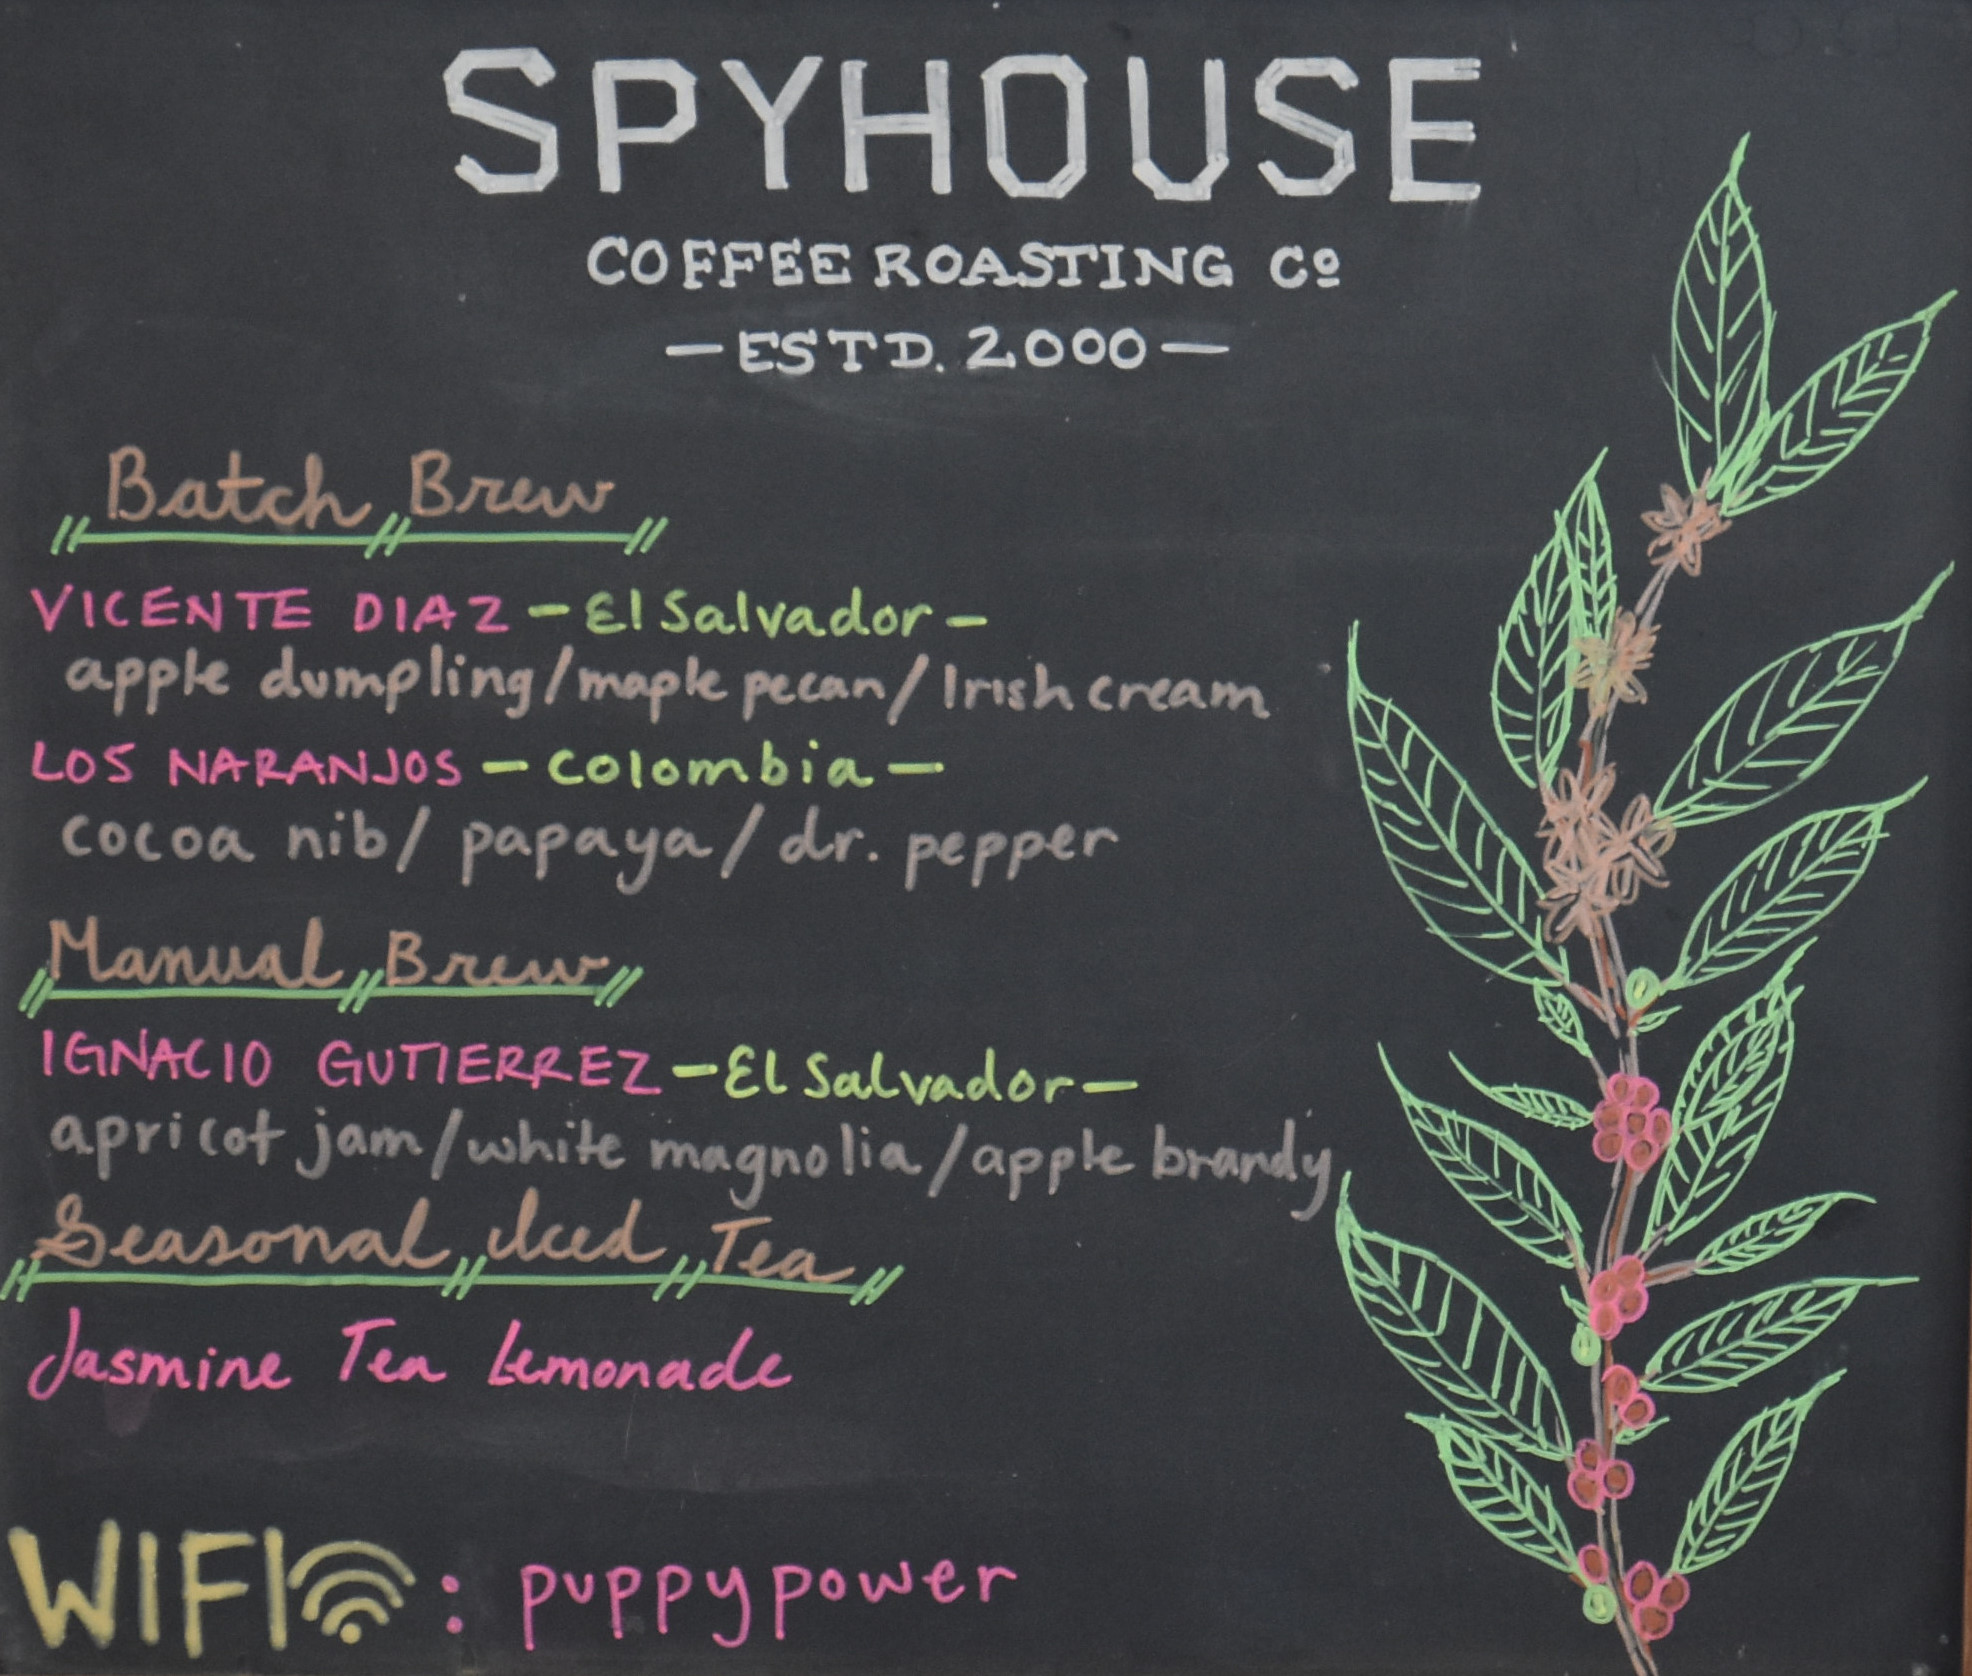 Details of the single-origin coffees available at Spyhouse Coffee in St Paul, two on batch brew, one on pour-over, during my visit in September 2018.